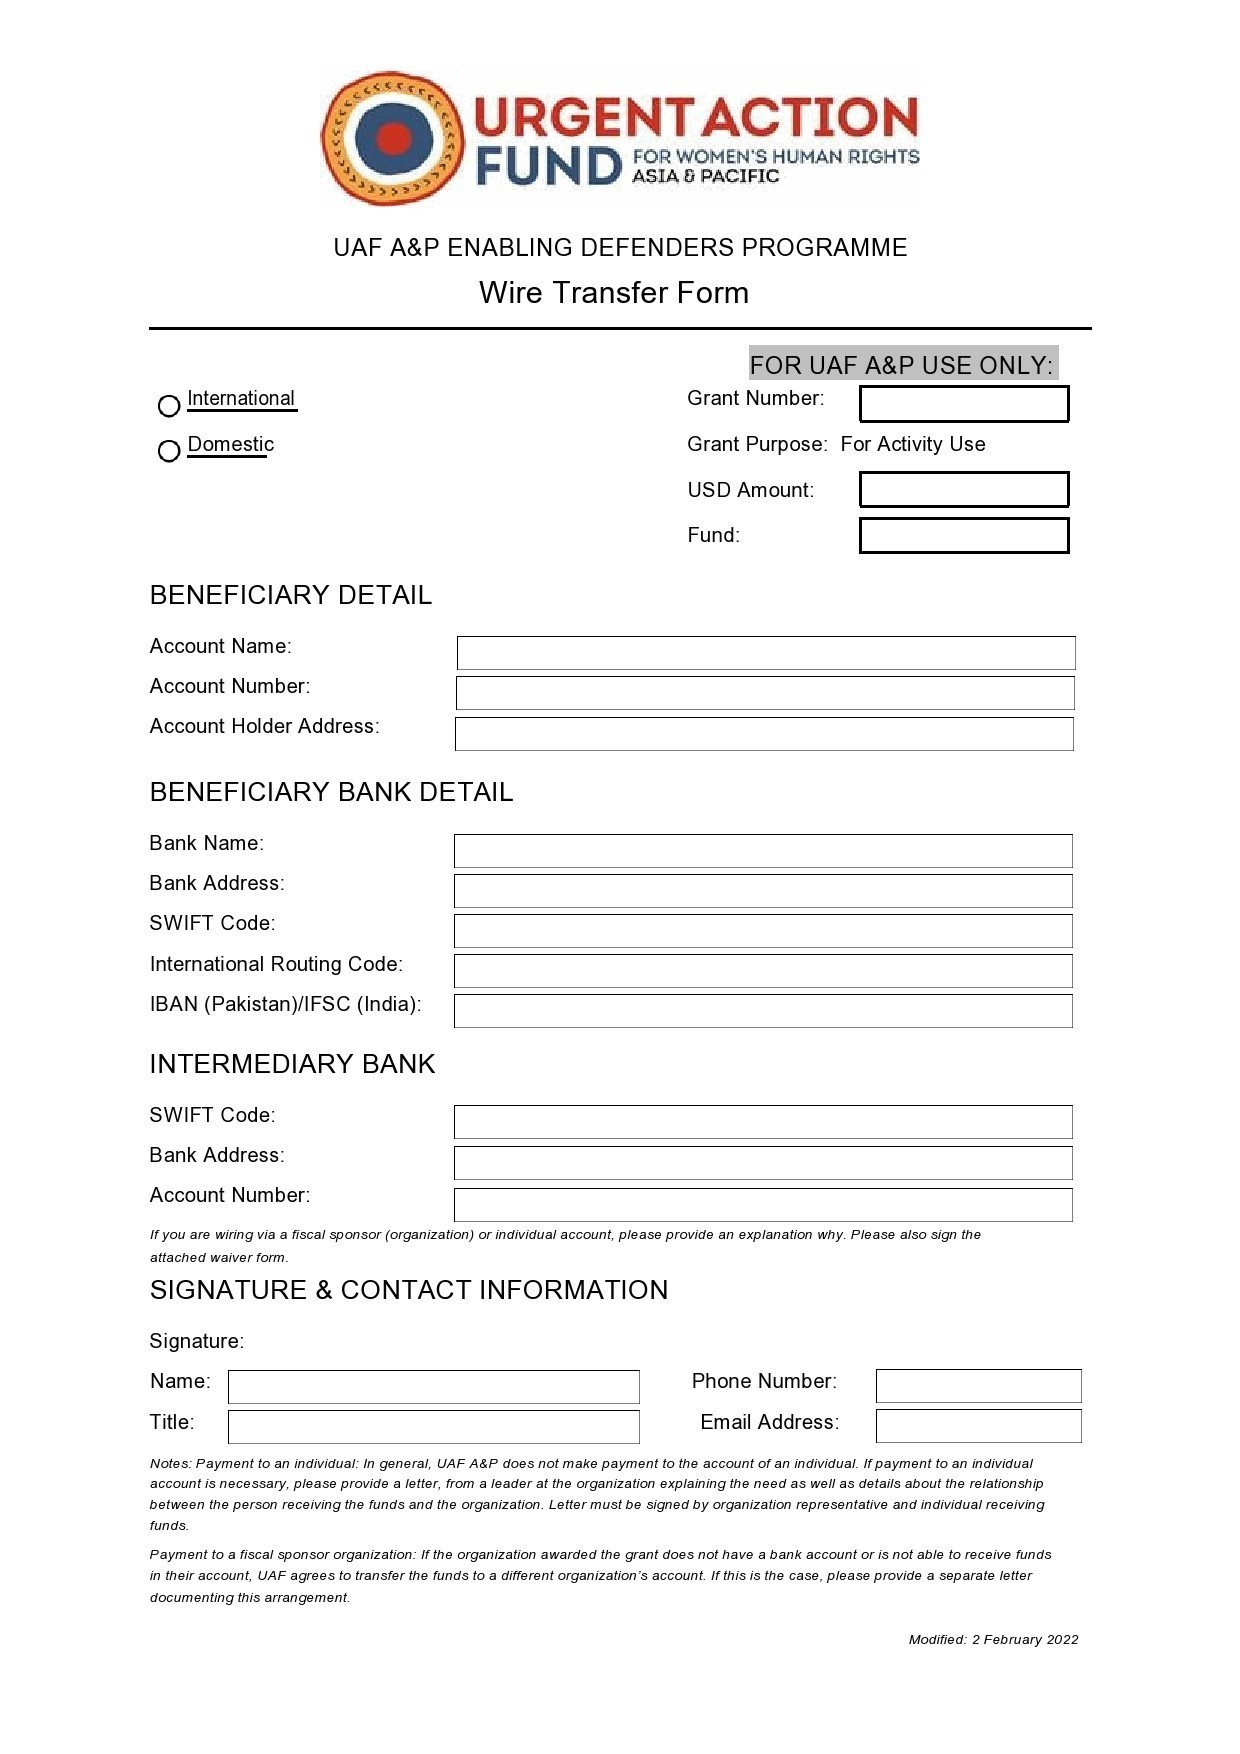 Free wire transfer form 33